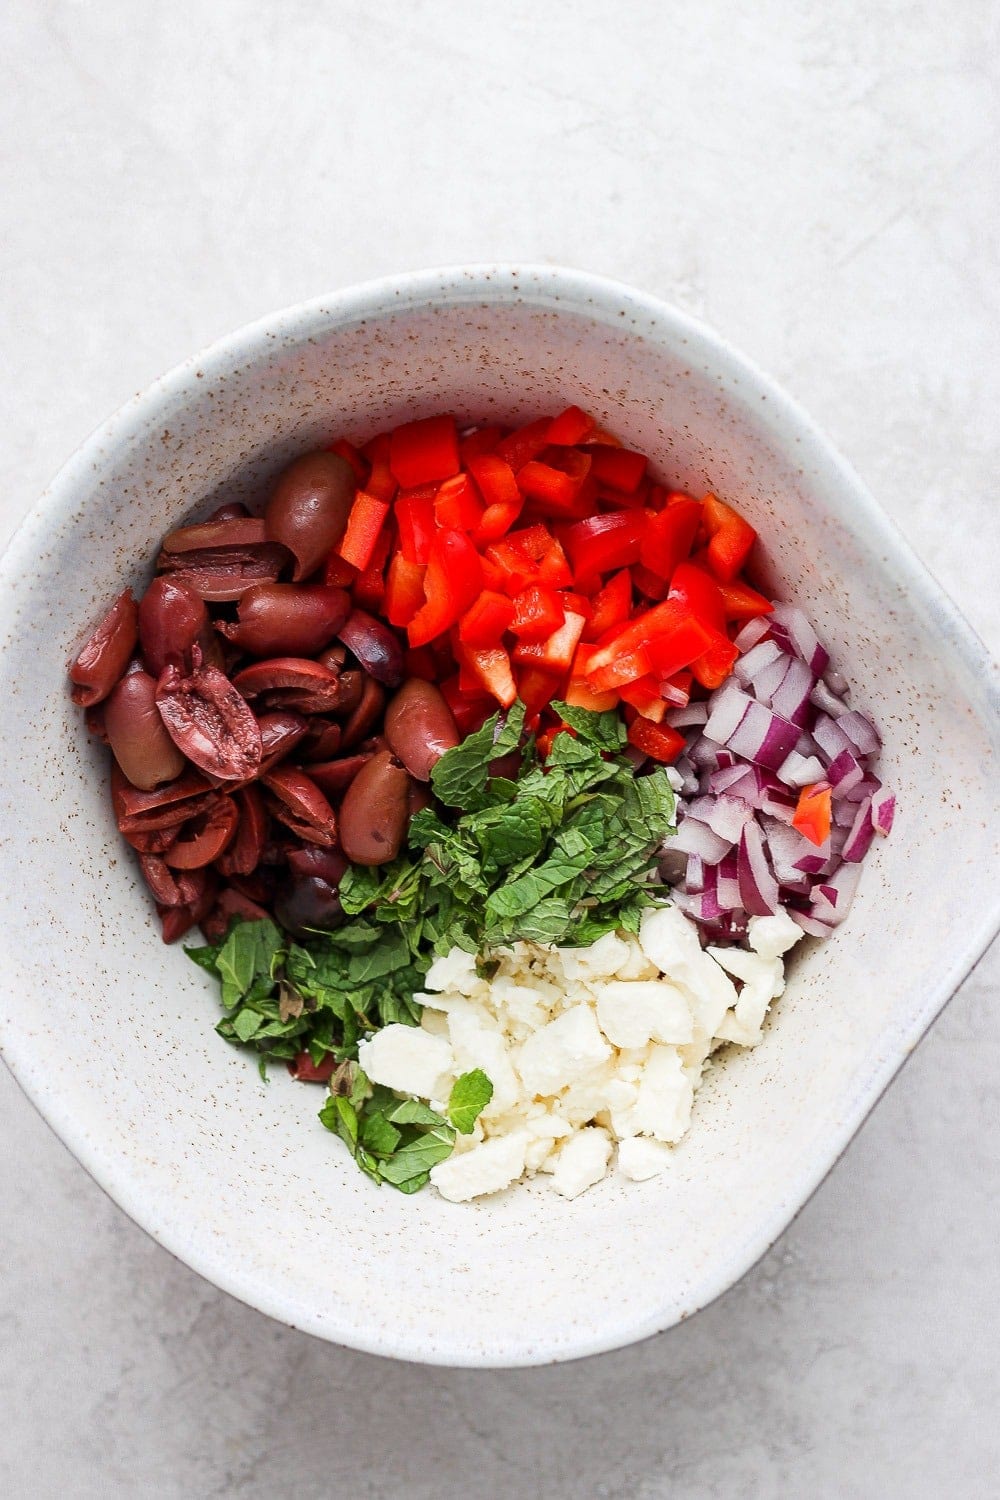 Ingredients for the greek salad in a large bowl